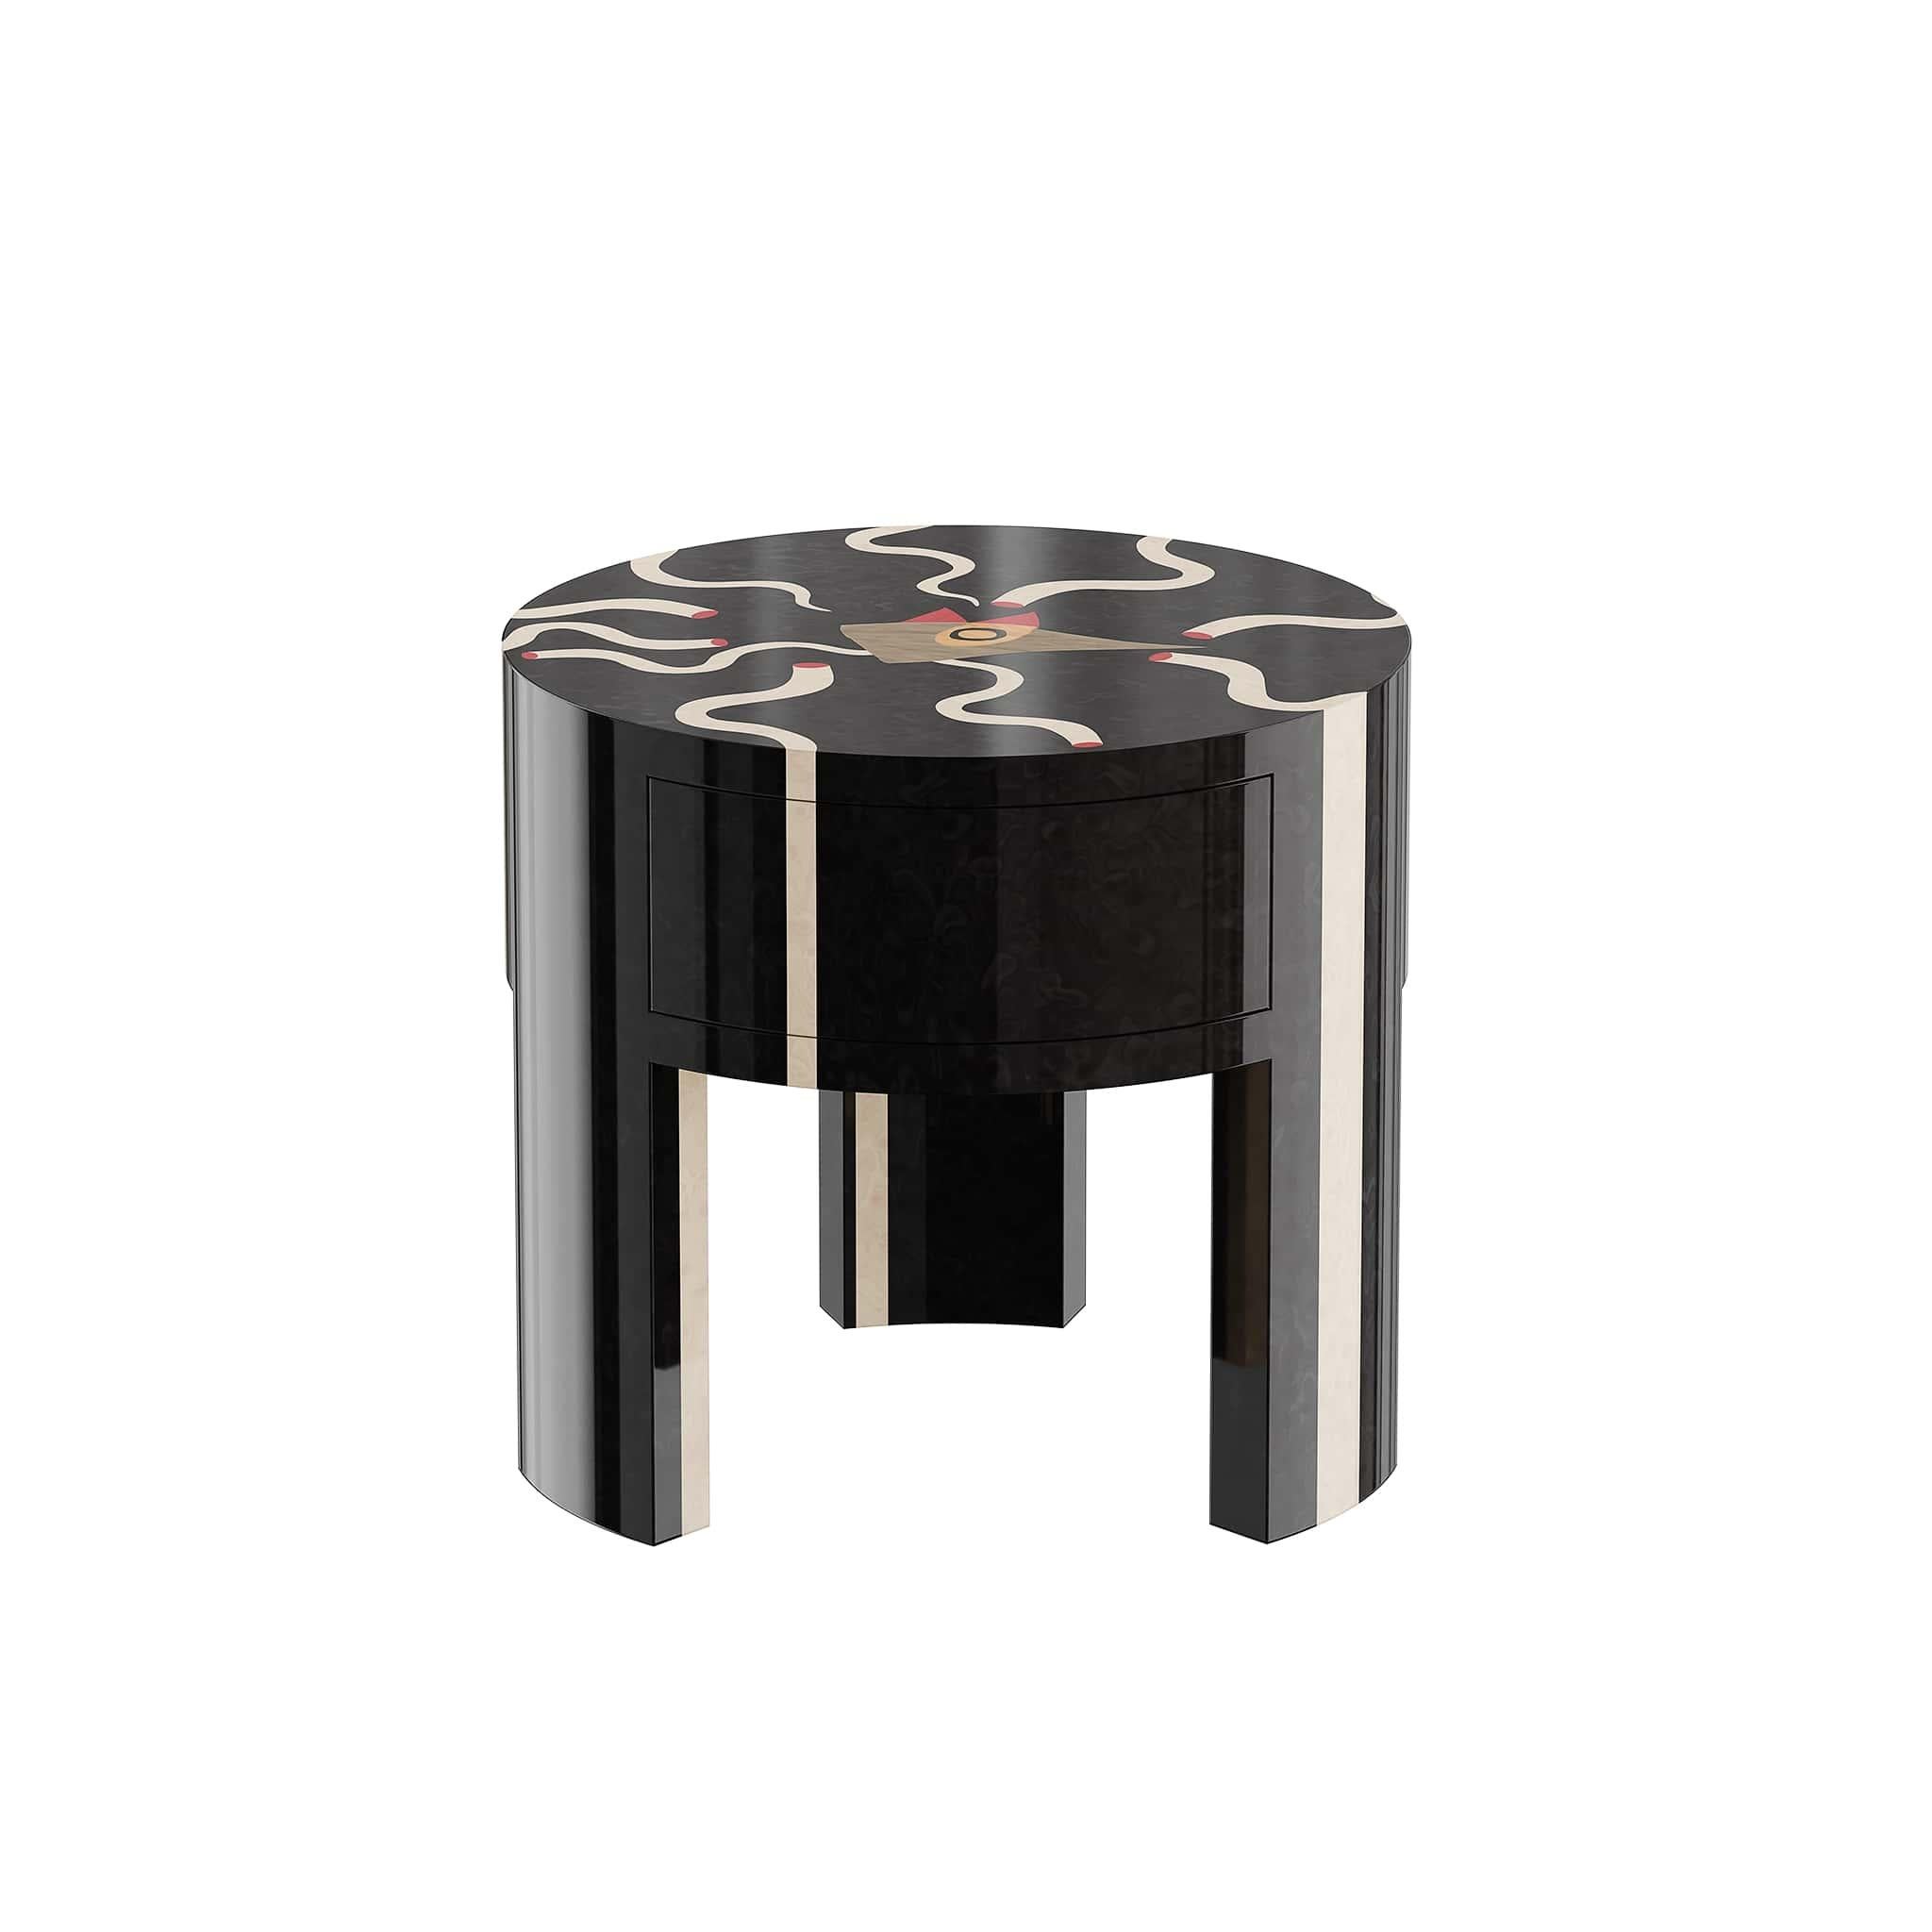 Birds Bedside Table is hand-crafted and boldly decorated using marquetry. Featuring one drawer, its round silhouette with contrasting colors enhances any modern bedroom design.
A captivating and modern bedside table, exquisitely designed with a